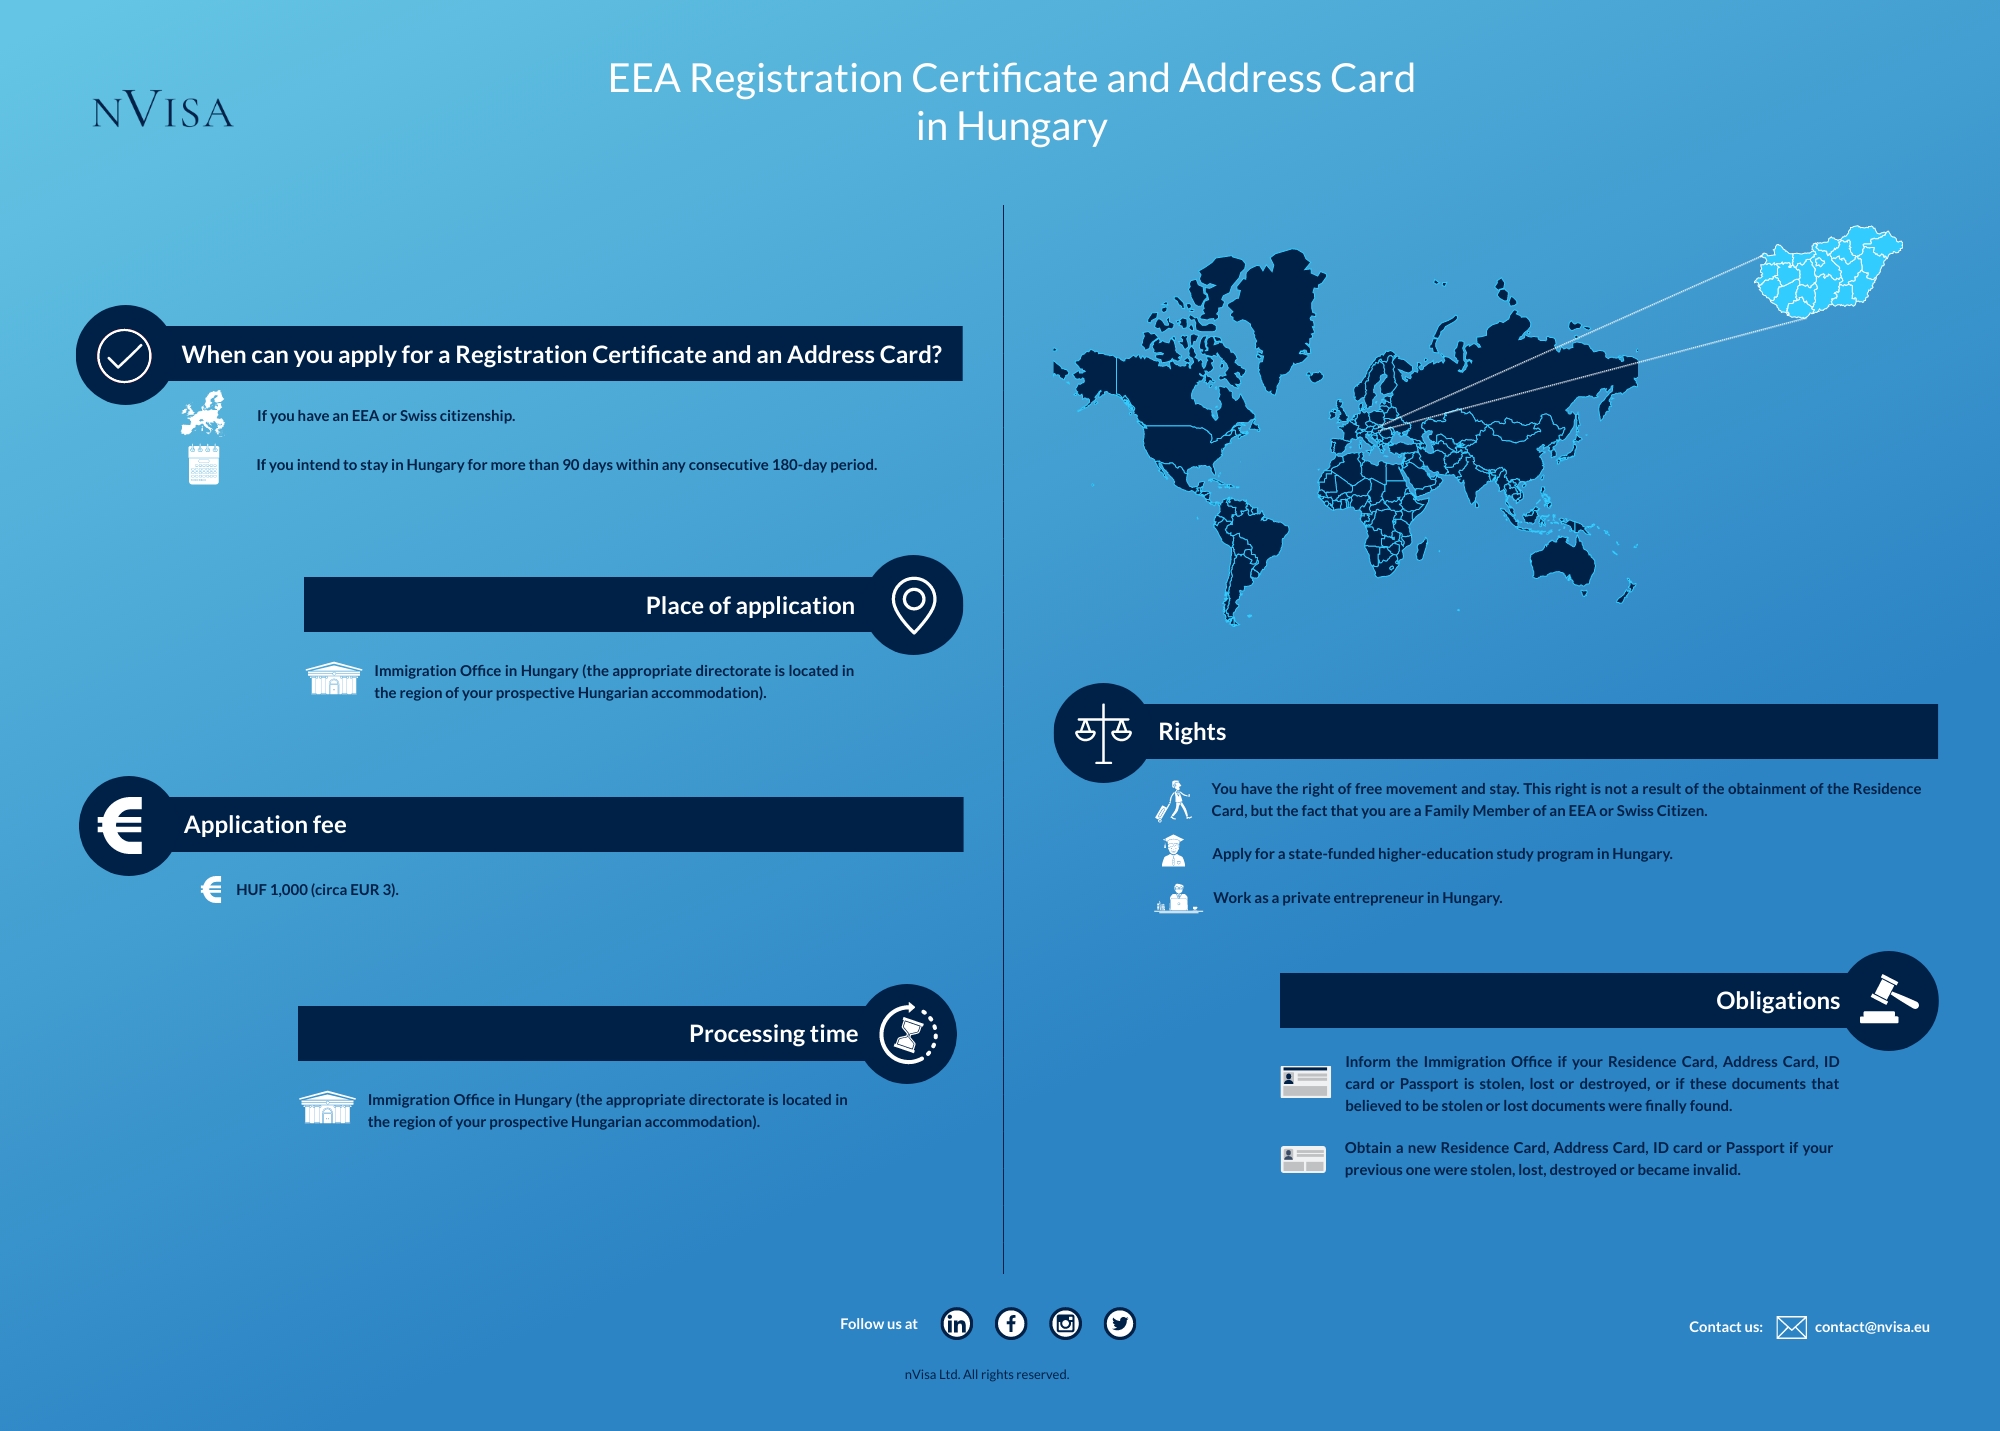 Infographic about immigration requirements and the details of obtaining an EEA Registration Certificate and Address Card for an EEA or Swiss Citizen in Hungary.